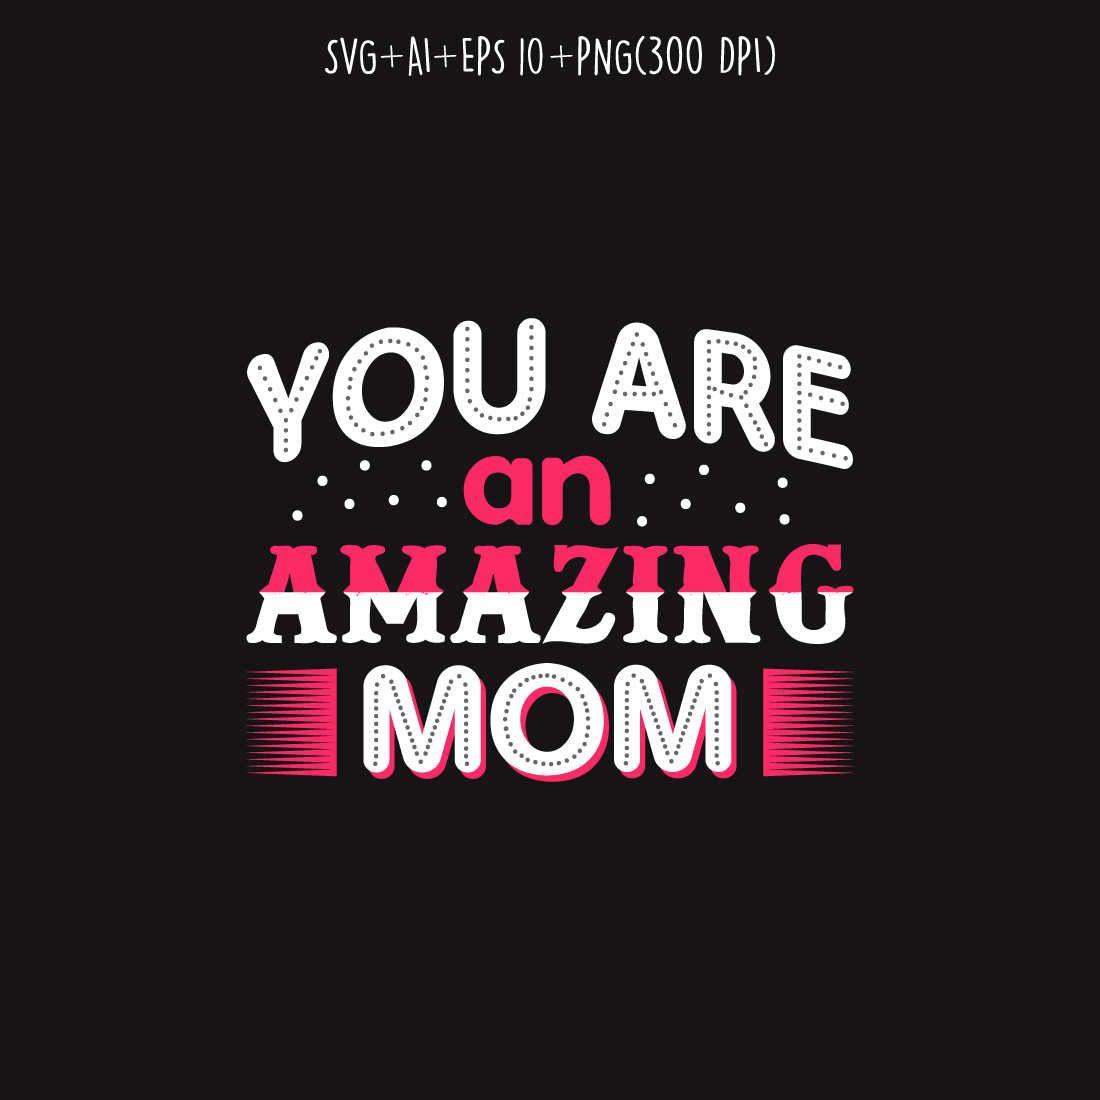 You are my amazing mom design for t-shirts, cards, frame artwork, phone cases, bags, mugs, stickers, tumblers, print, etc cover image.